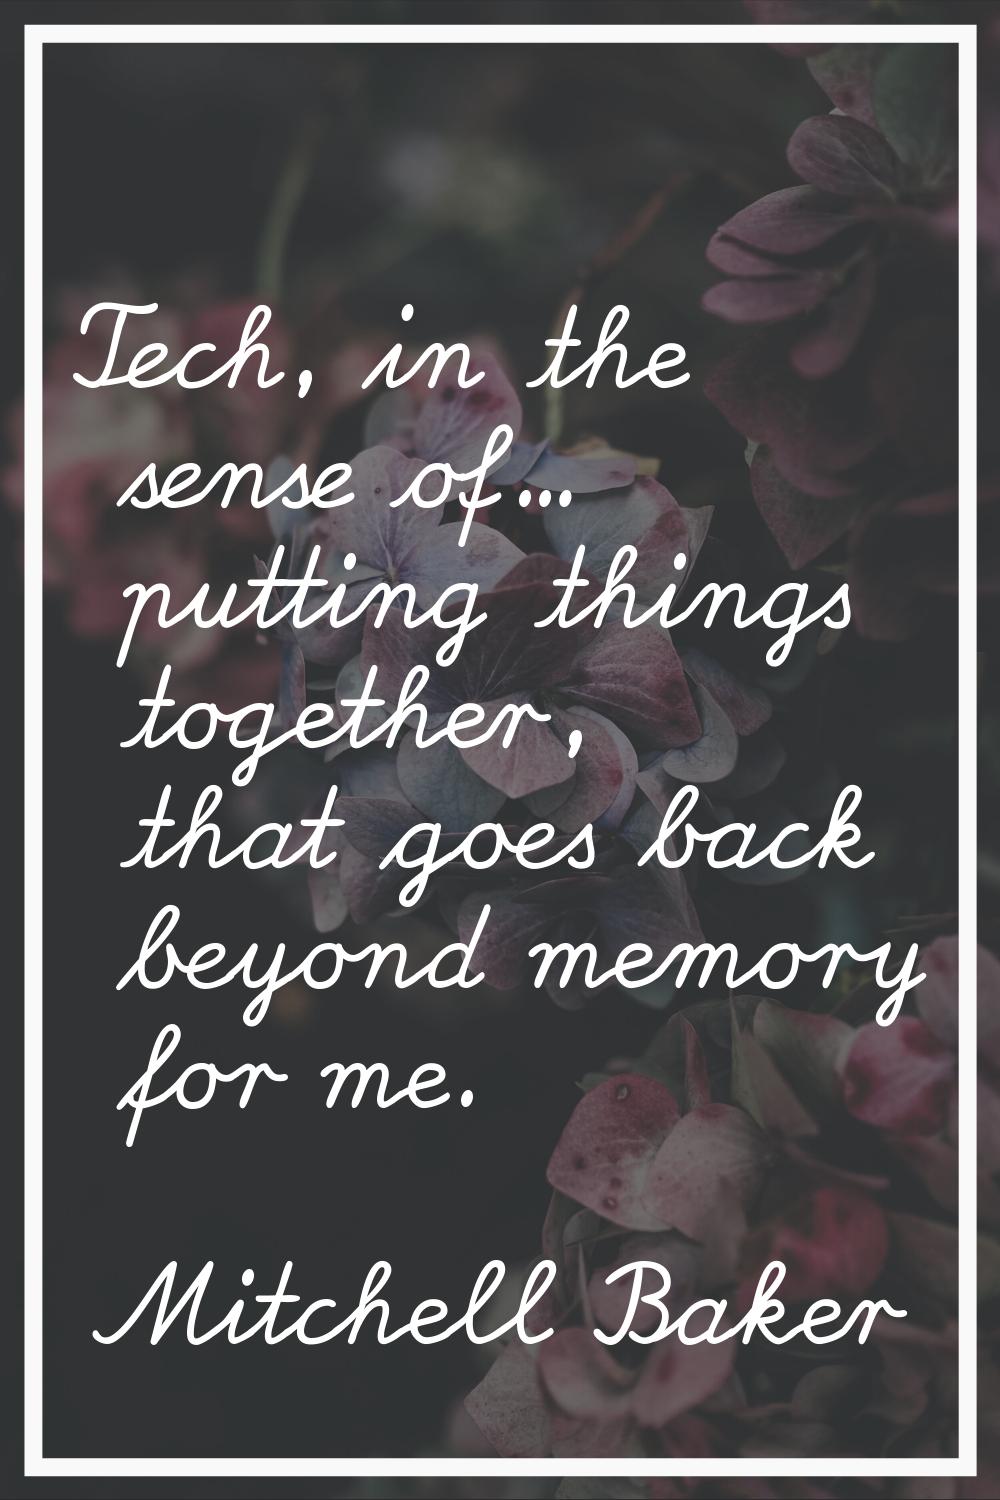 Tech, in the sense of... putting things together, that goes back beyond memory for me.